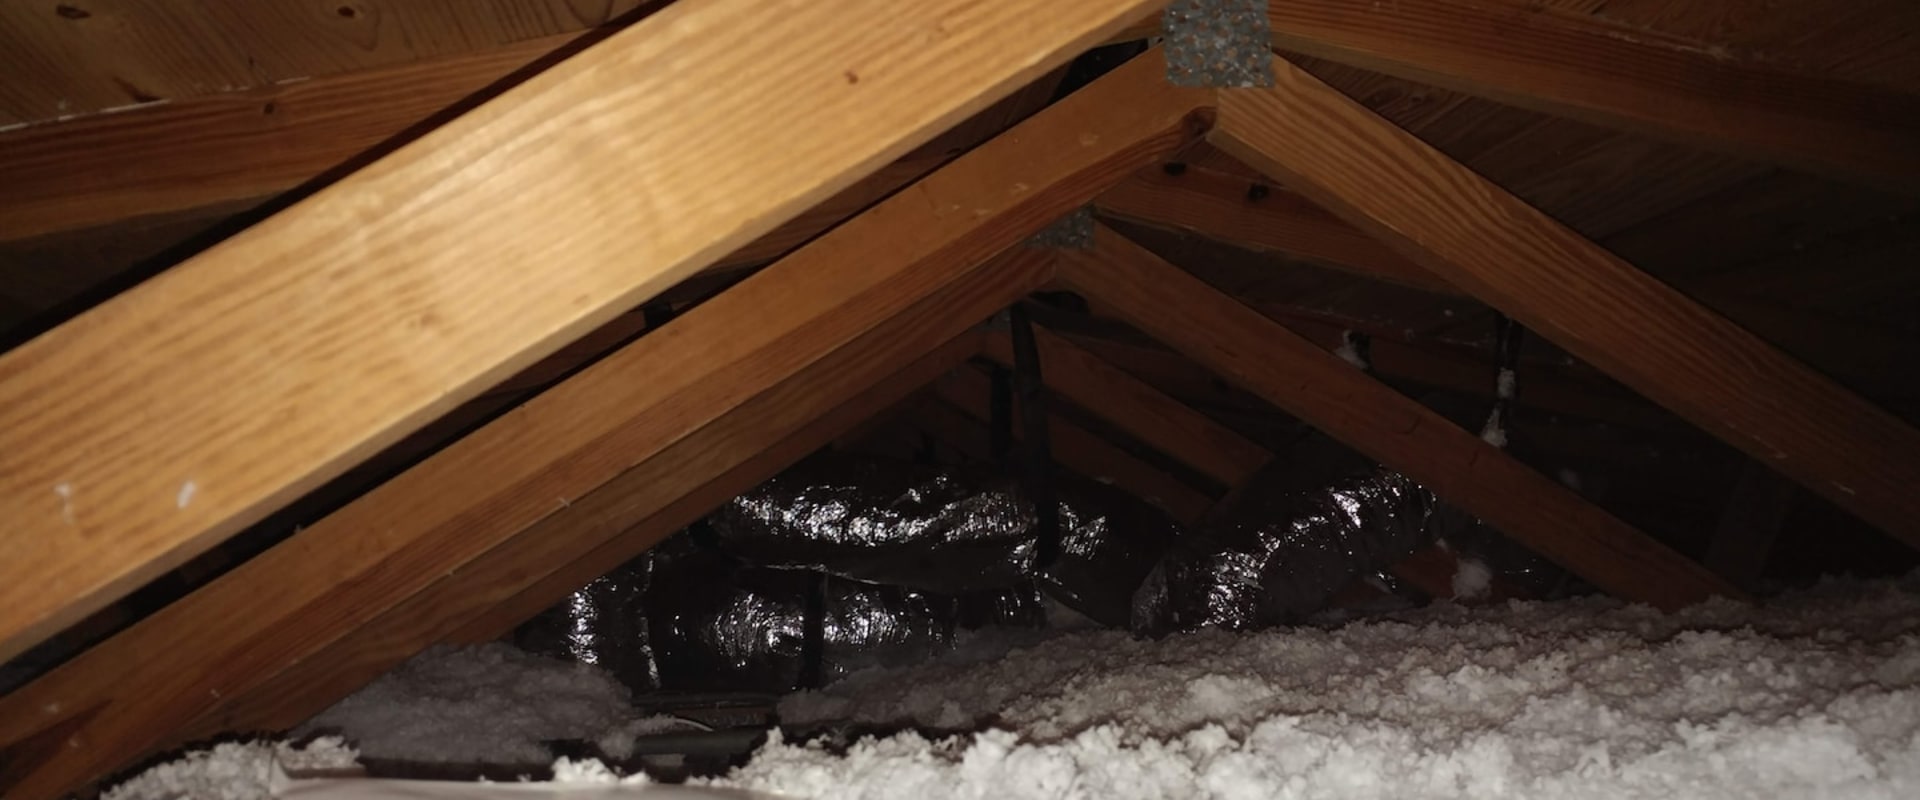 Air Duct Repair Services in Pembroke Pines, FL: What You Need to Know